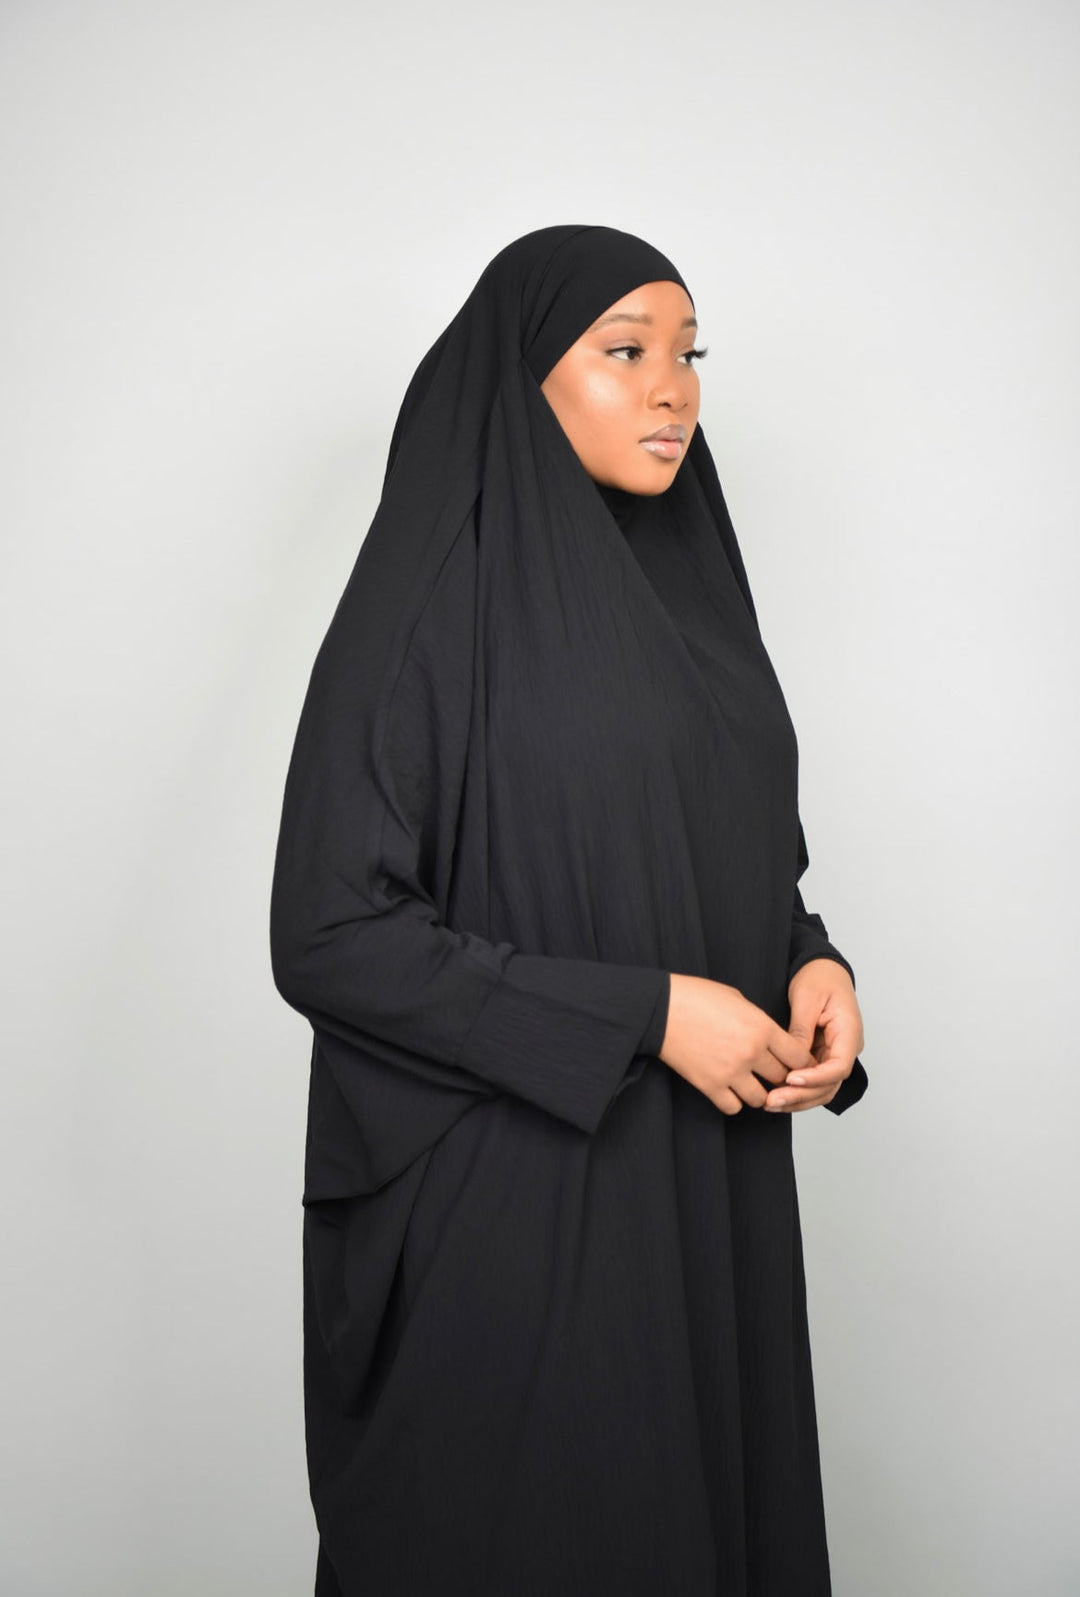 Get trendy with Mariya 2-piece Jilbab - Black -  available at Voilee NY. Grab yours for $34.99 today!